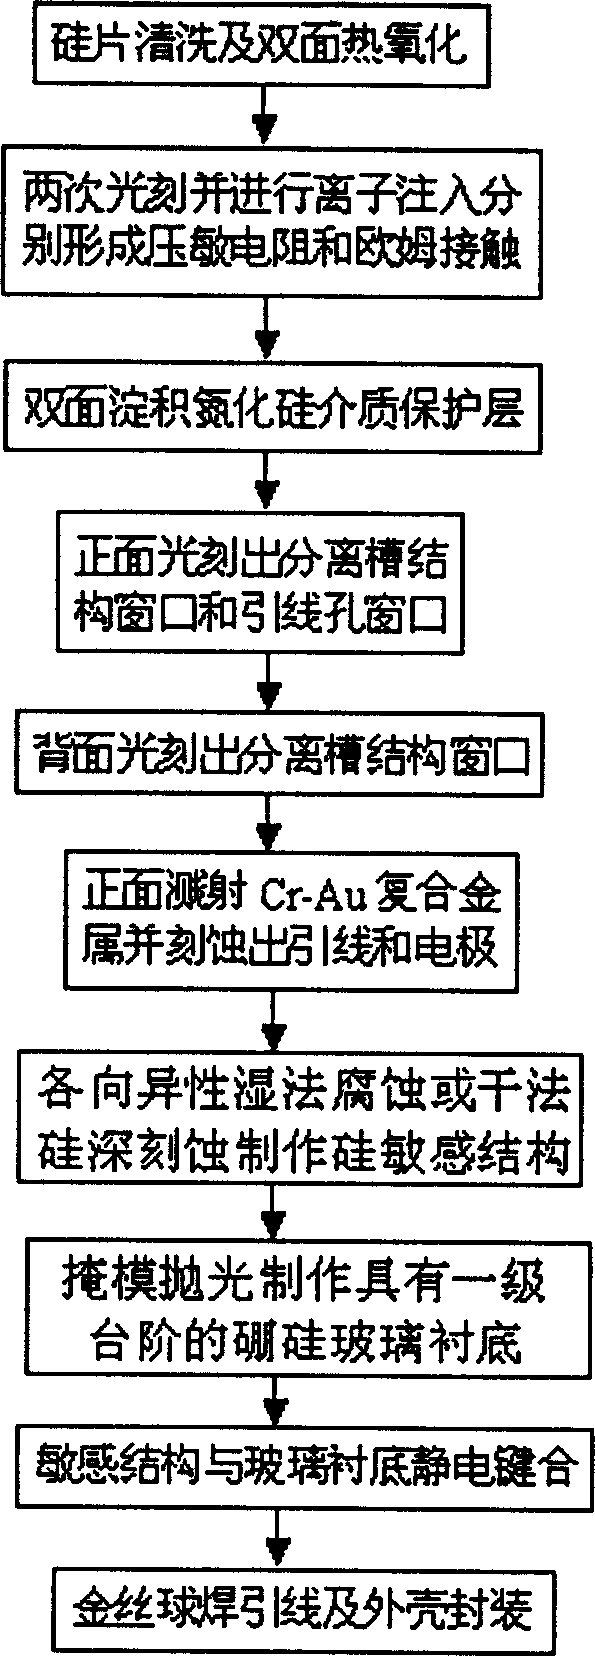 Silicon micro machine inclination sensor and its manufacturing method